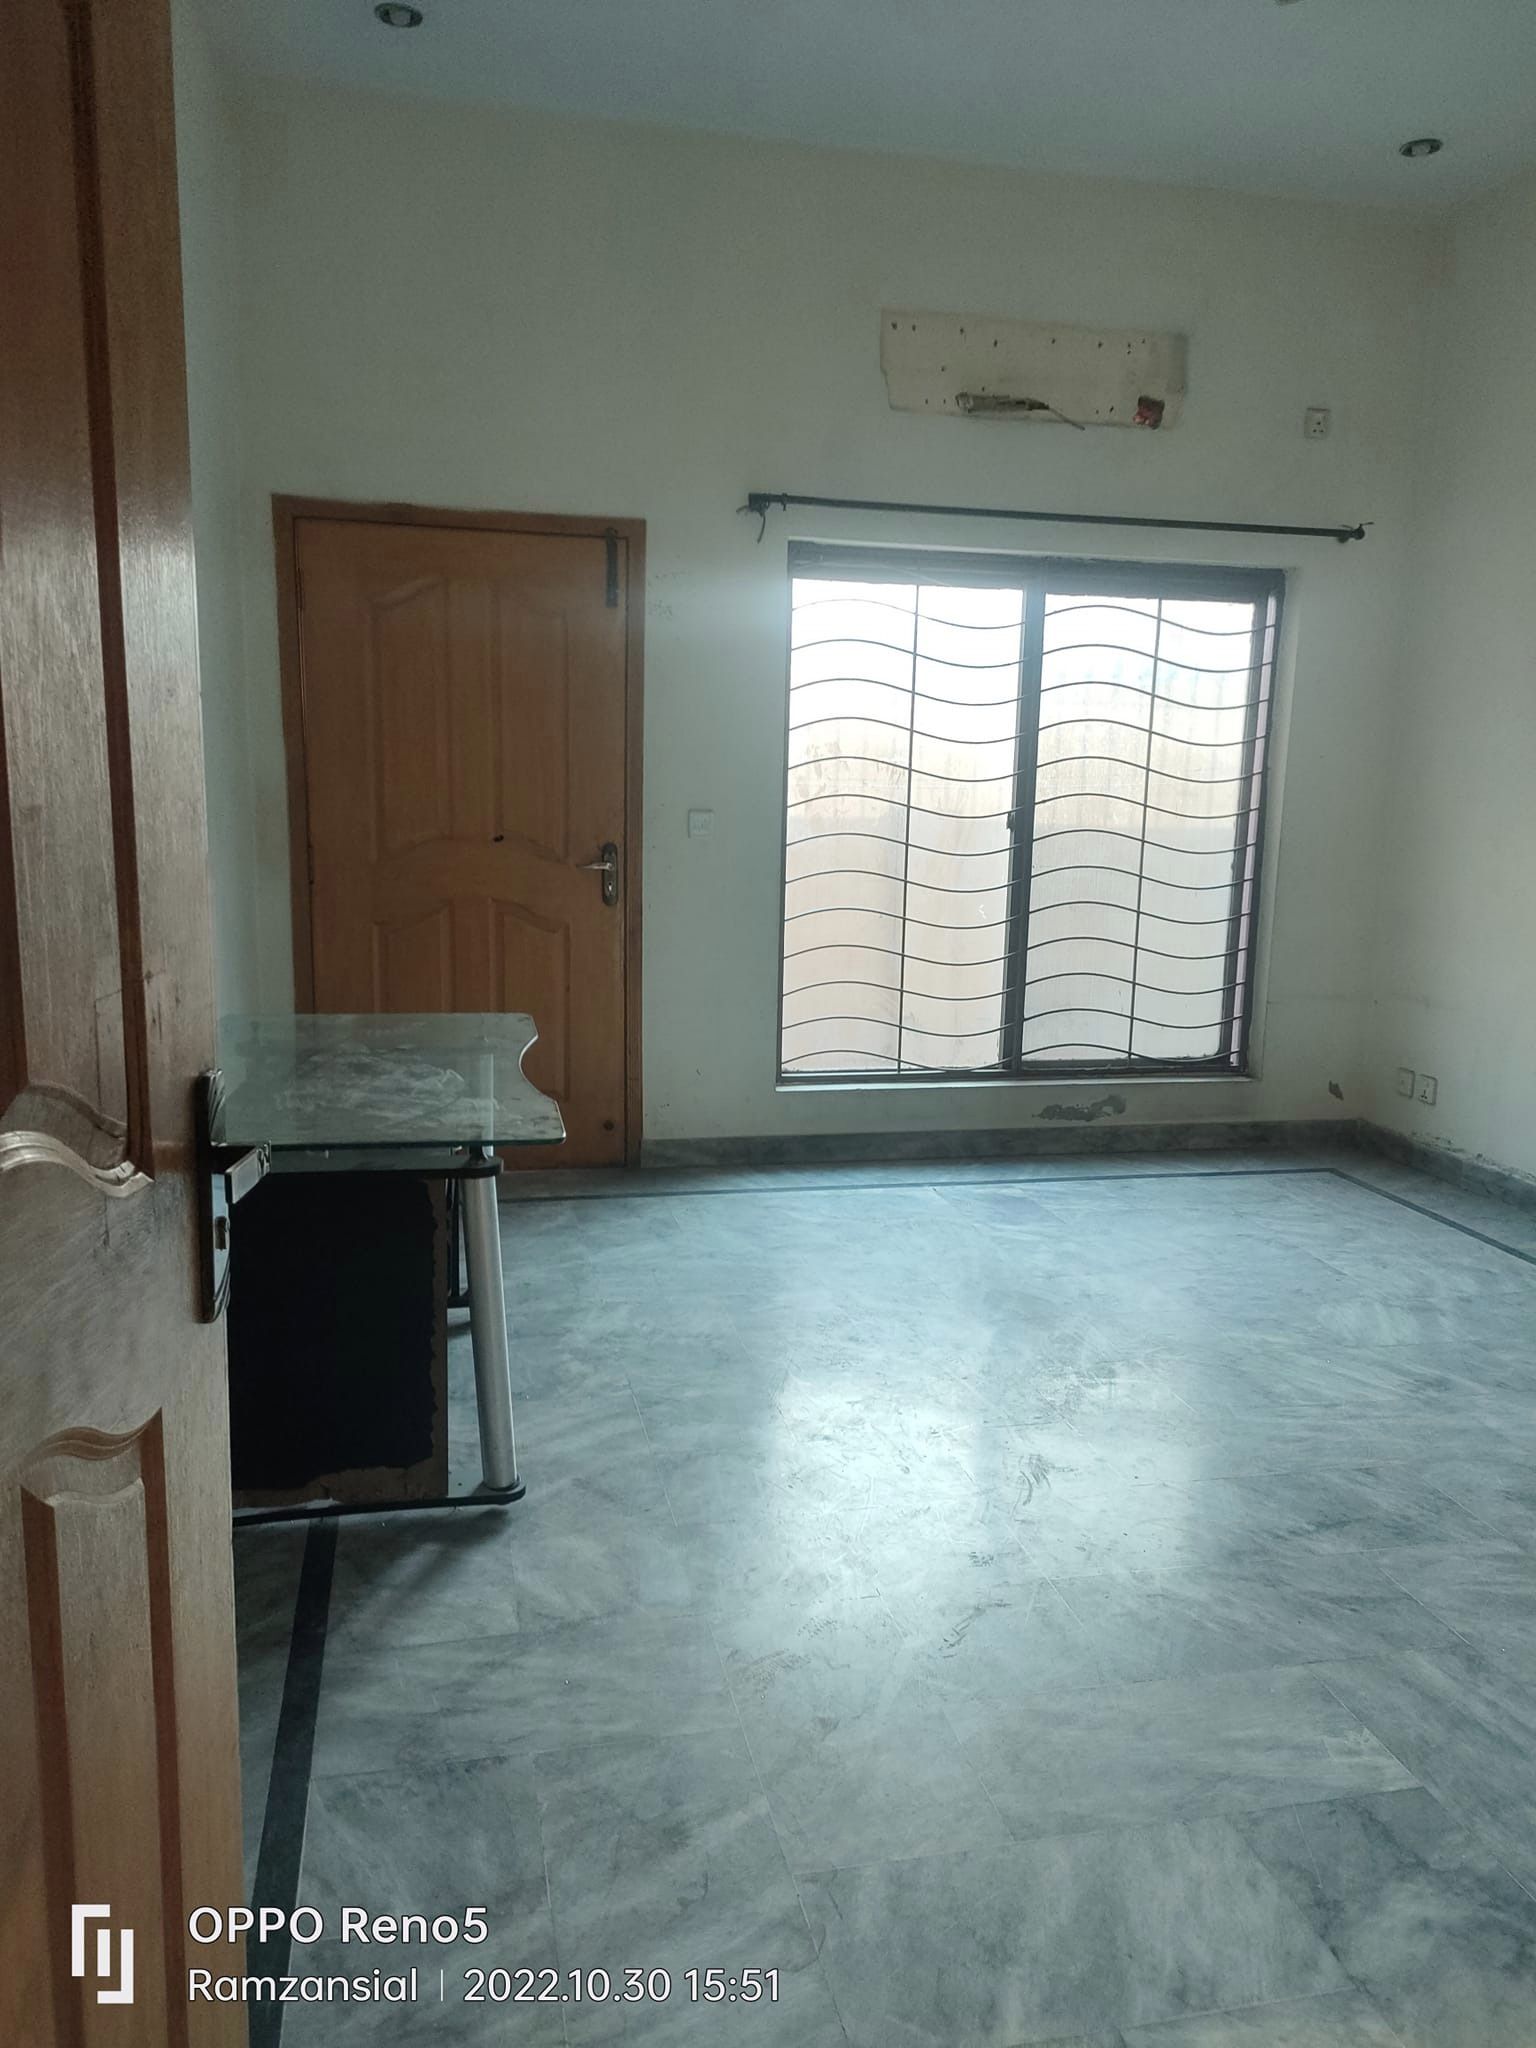 15 Marla lower portion available for rent in PIA housing society near Wapda town Gol chukker Lahore